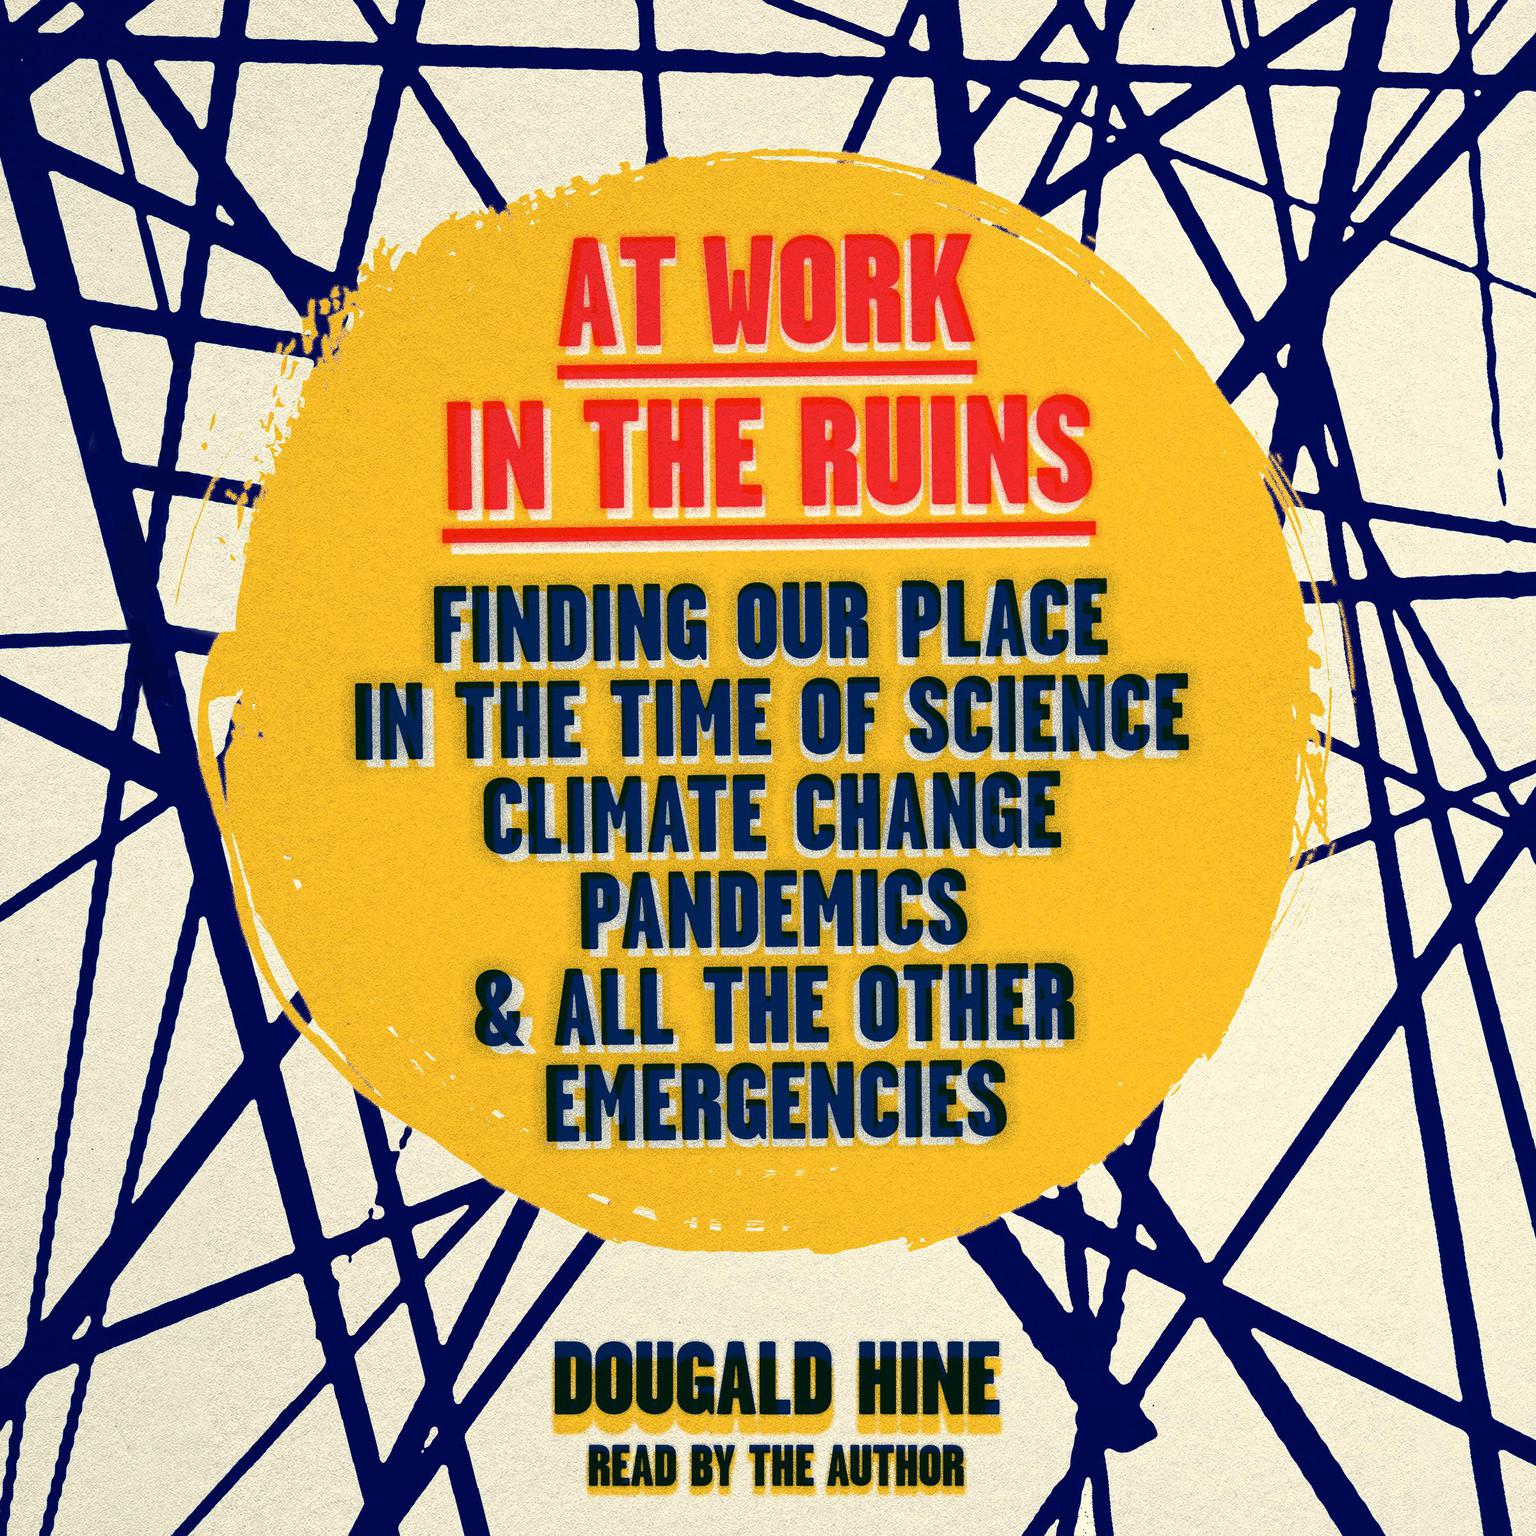 At Work in the Ruins: Finding Our Place in the Time of Science, Climate Change, Pandemics and All Other Emergencies Audiobook, by Dougald Hine